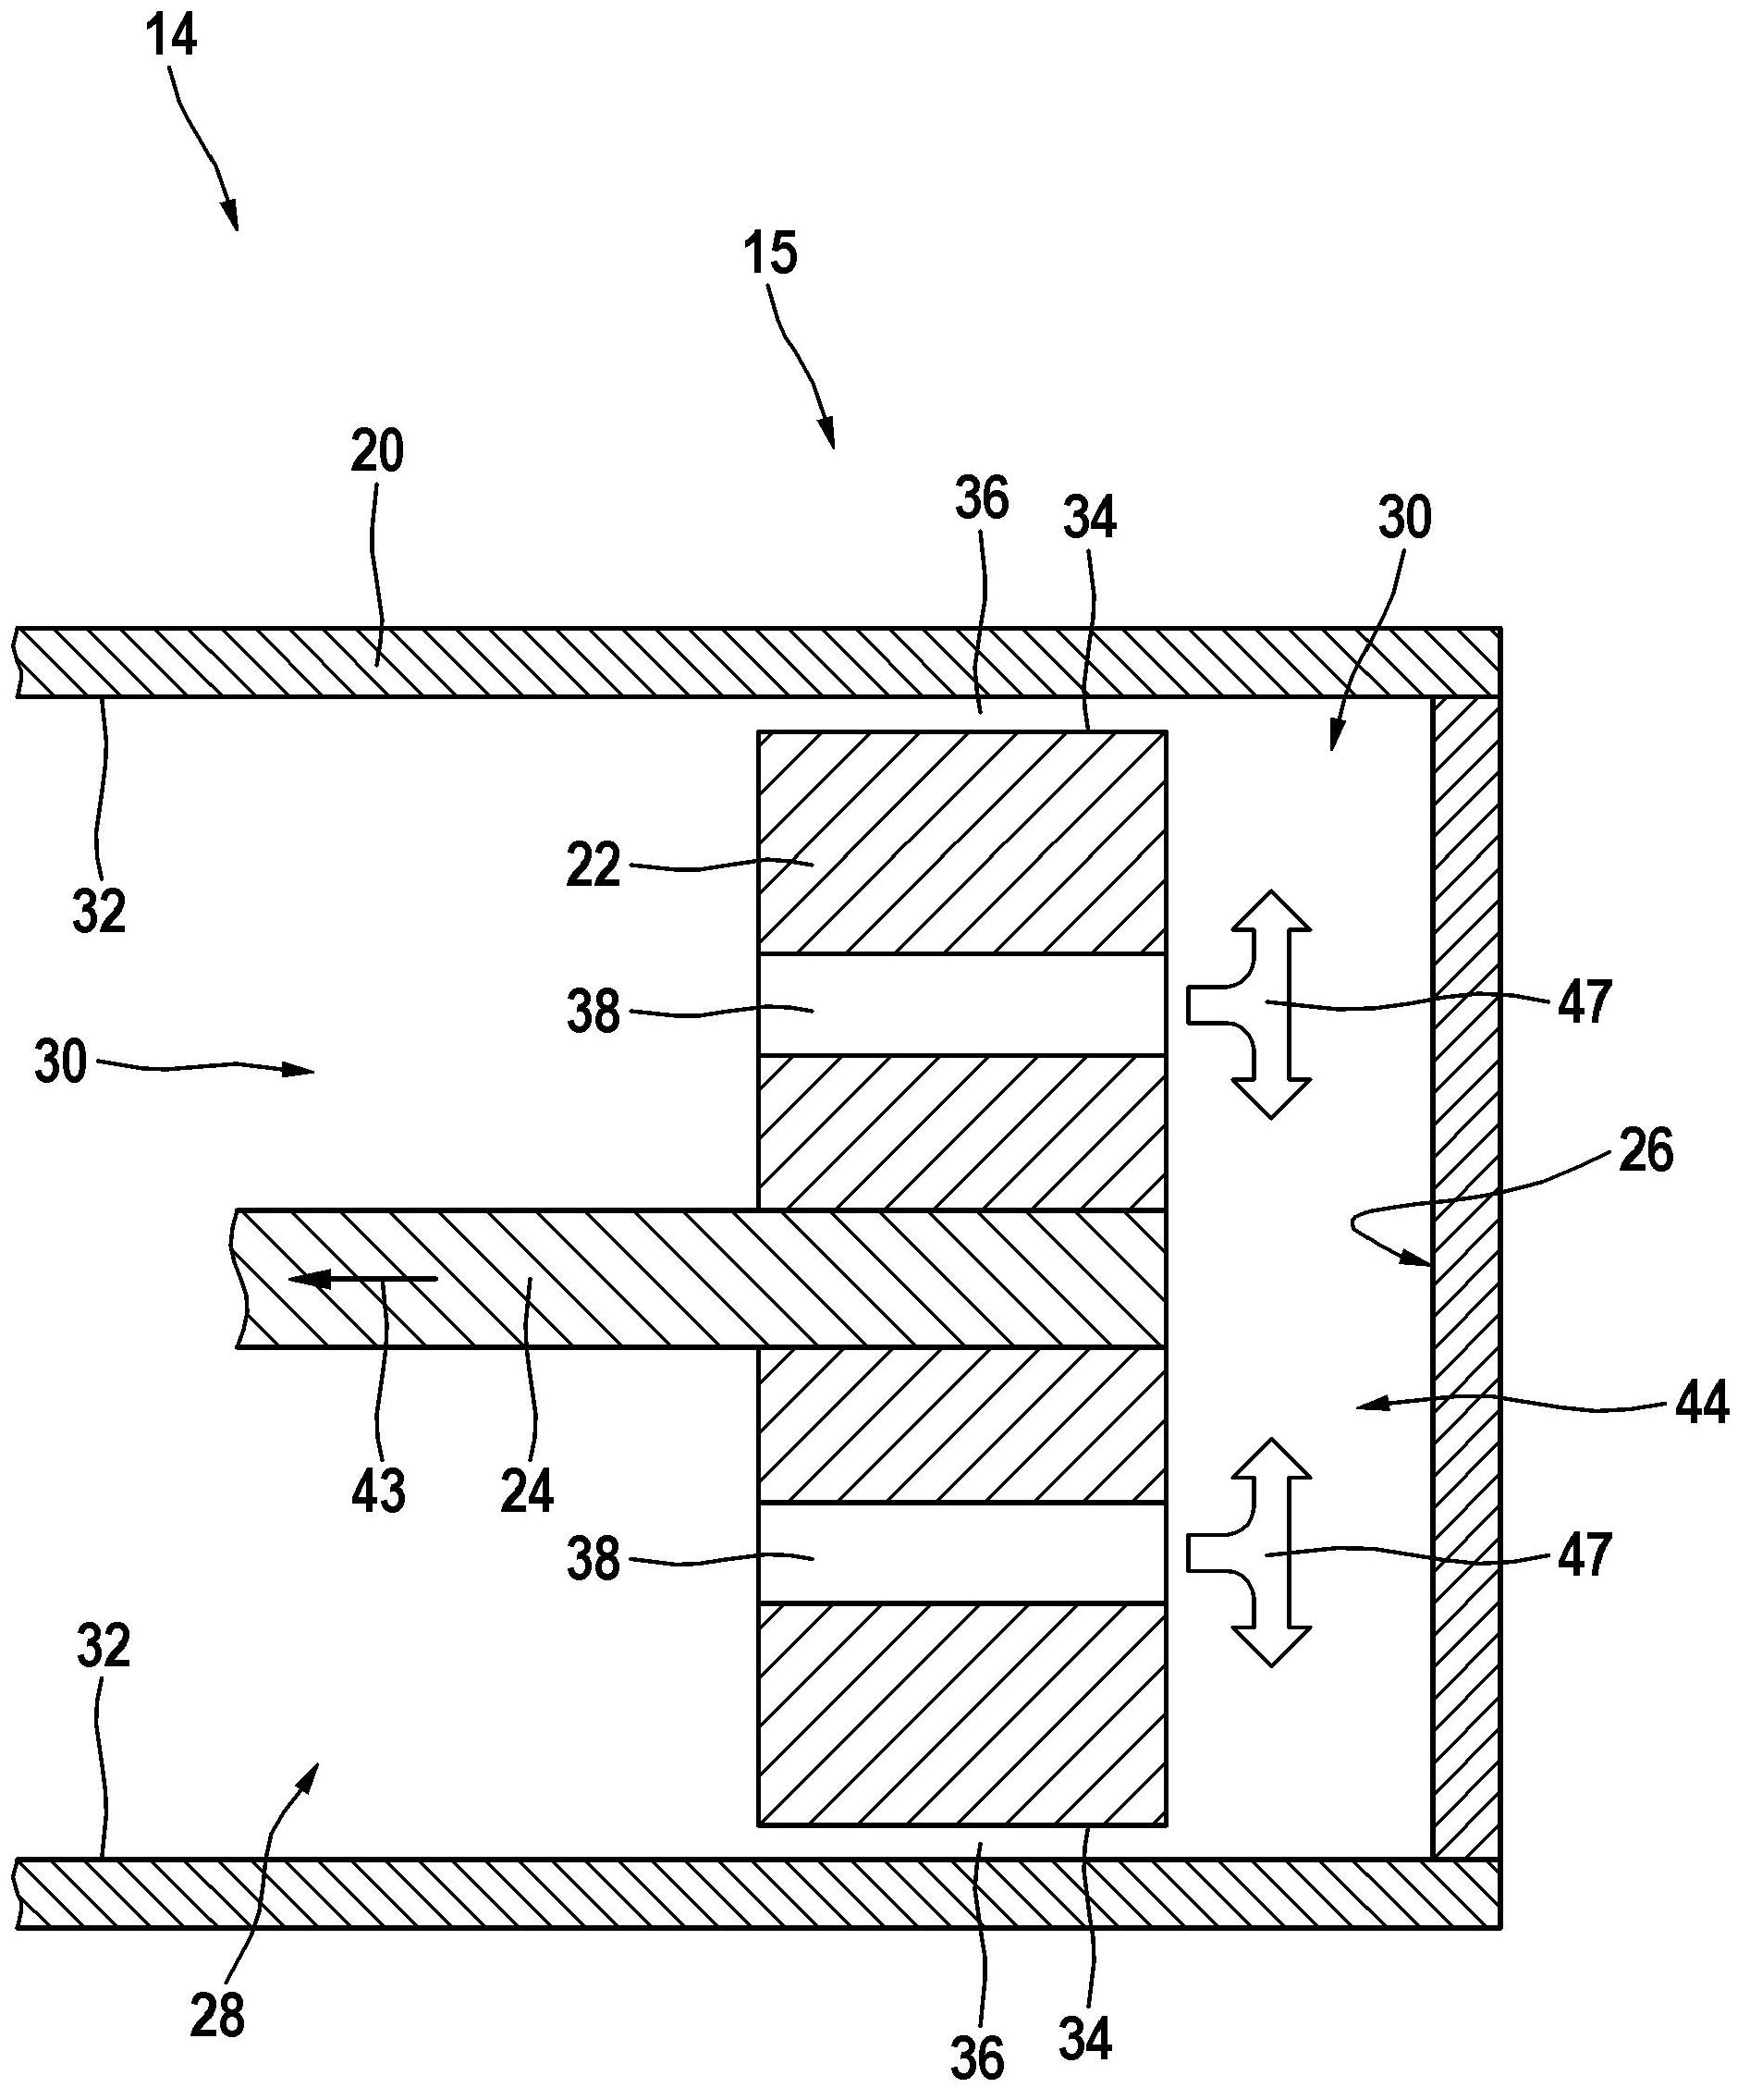 Electromagnetically actuated volume control valve, in particular for controlling the delivery volume of a high-pressure fuel pump